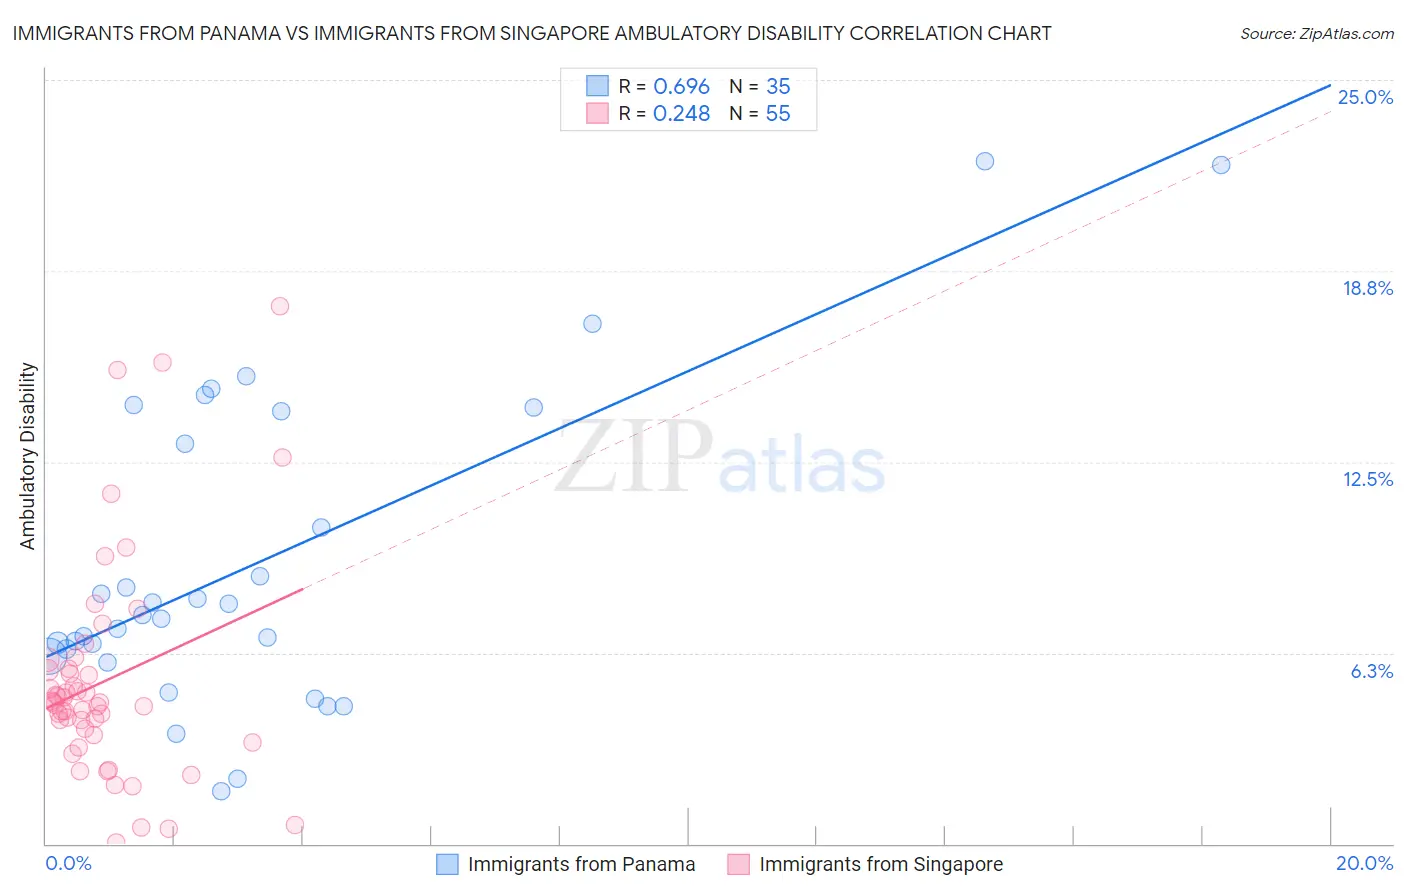 Immigrants from Panama vs Immigrants from Singapore Ambulatory Disability